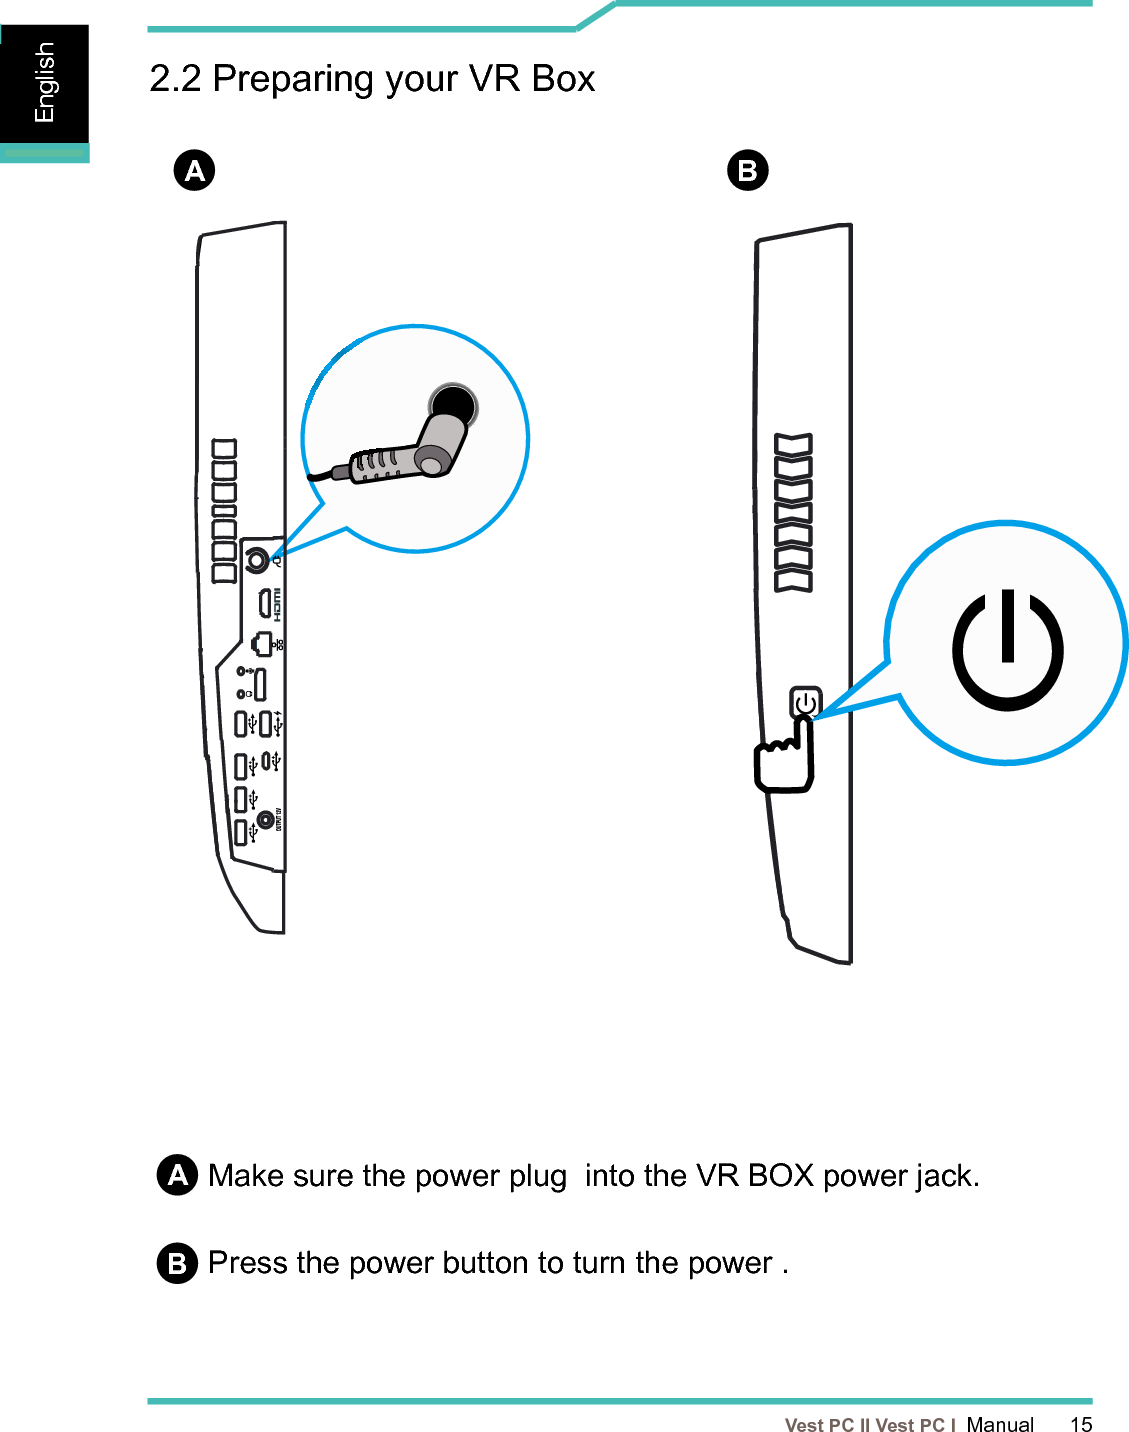   Vest PC II Vest PC I  Manual      15EnglishEnglishEnglish2.2 Preparing your VR Box  Make sure the power plug  into the VR BOX power jack.ABBPress the power button to turn the power .A